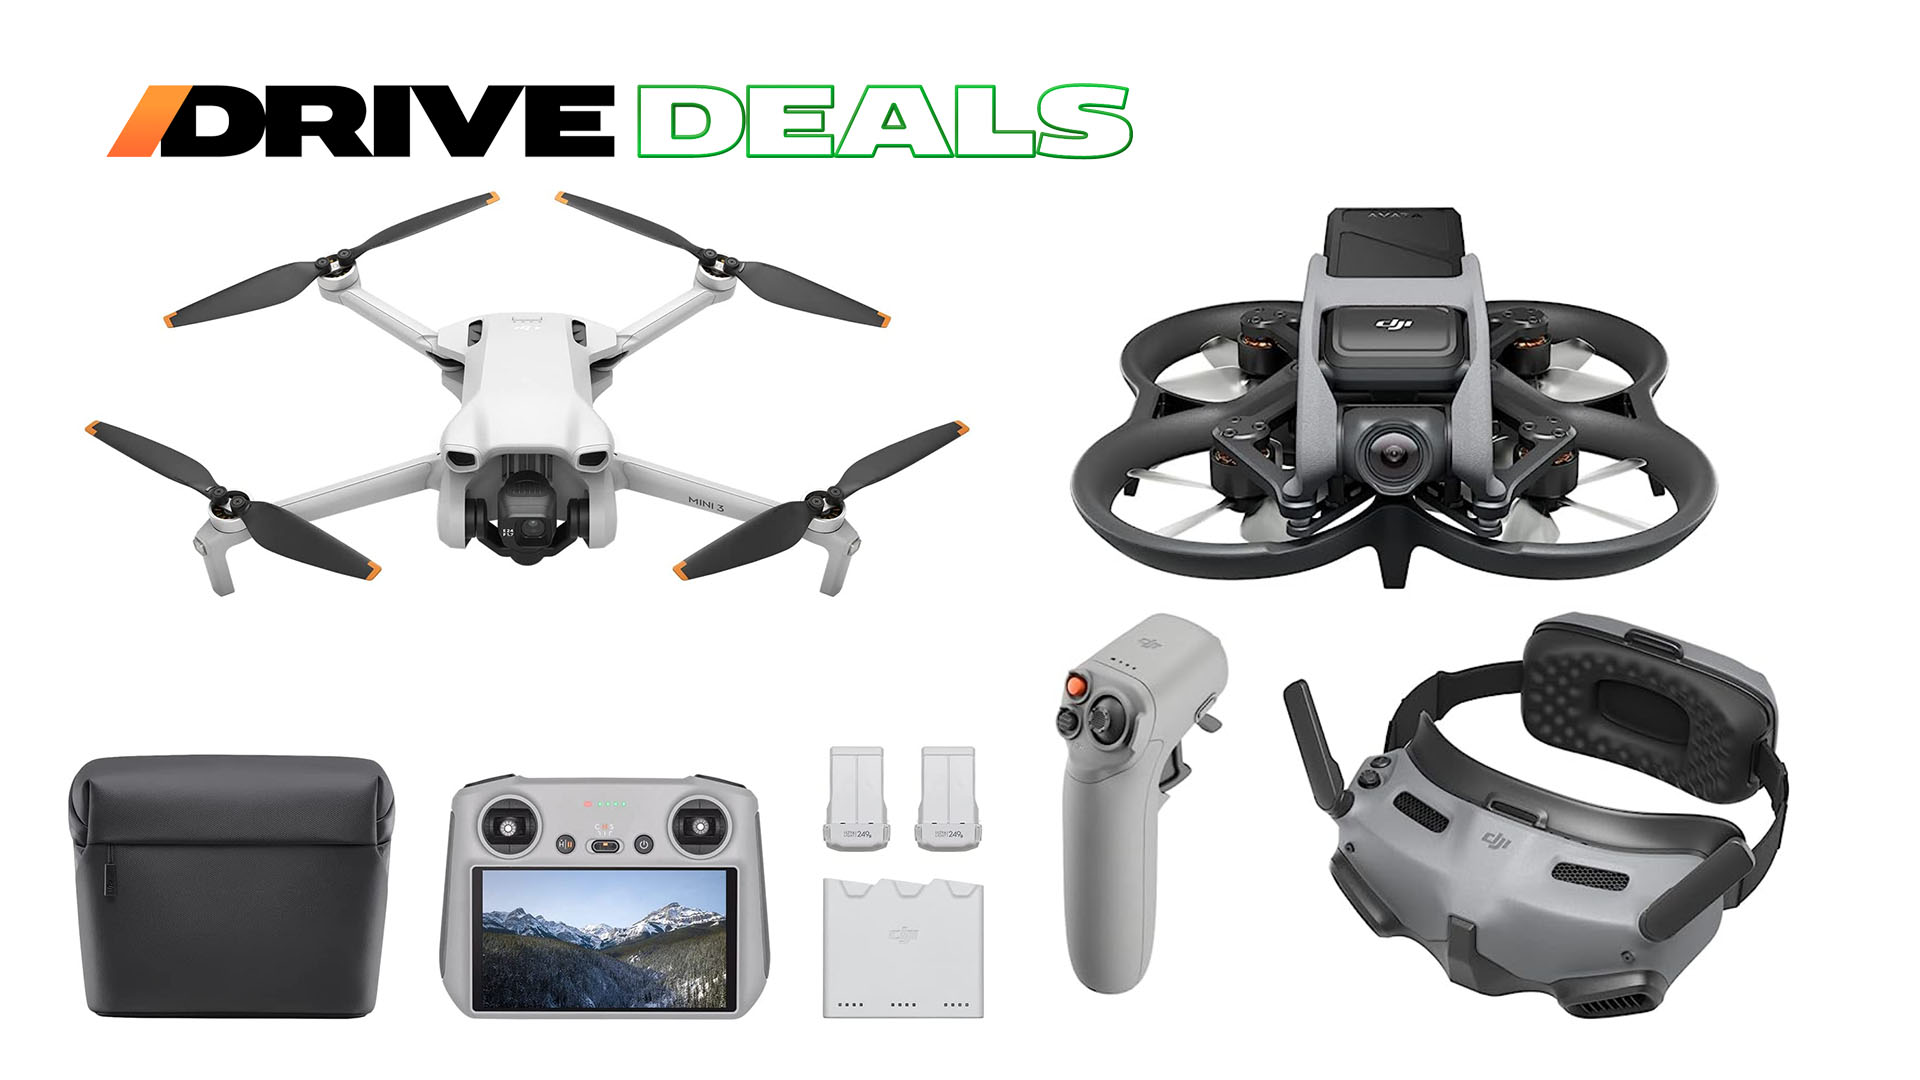 I found a cheap Prime Day drone deal I can stand behind